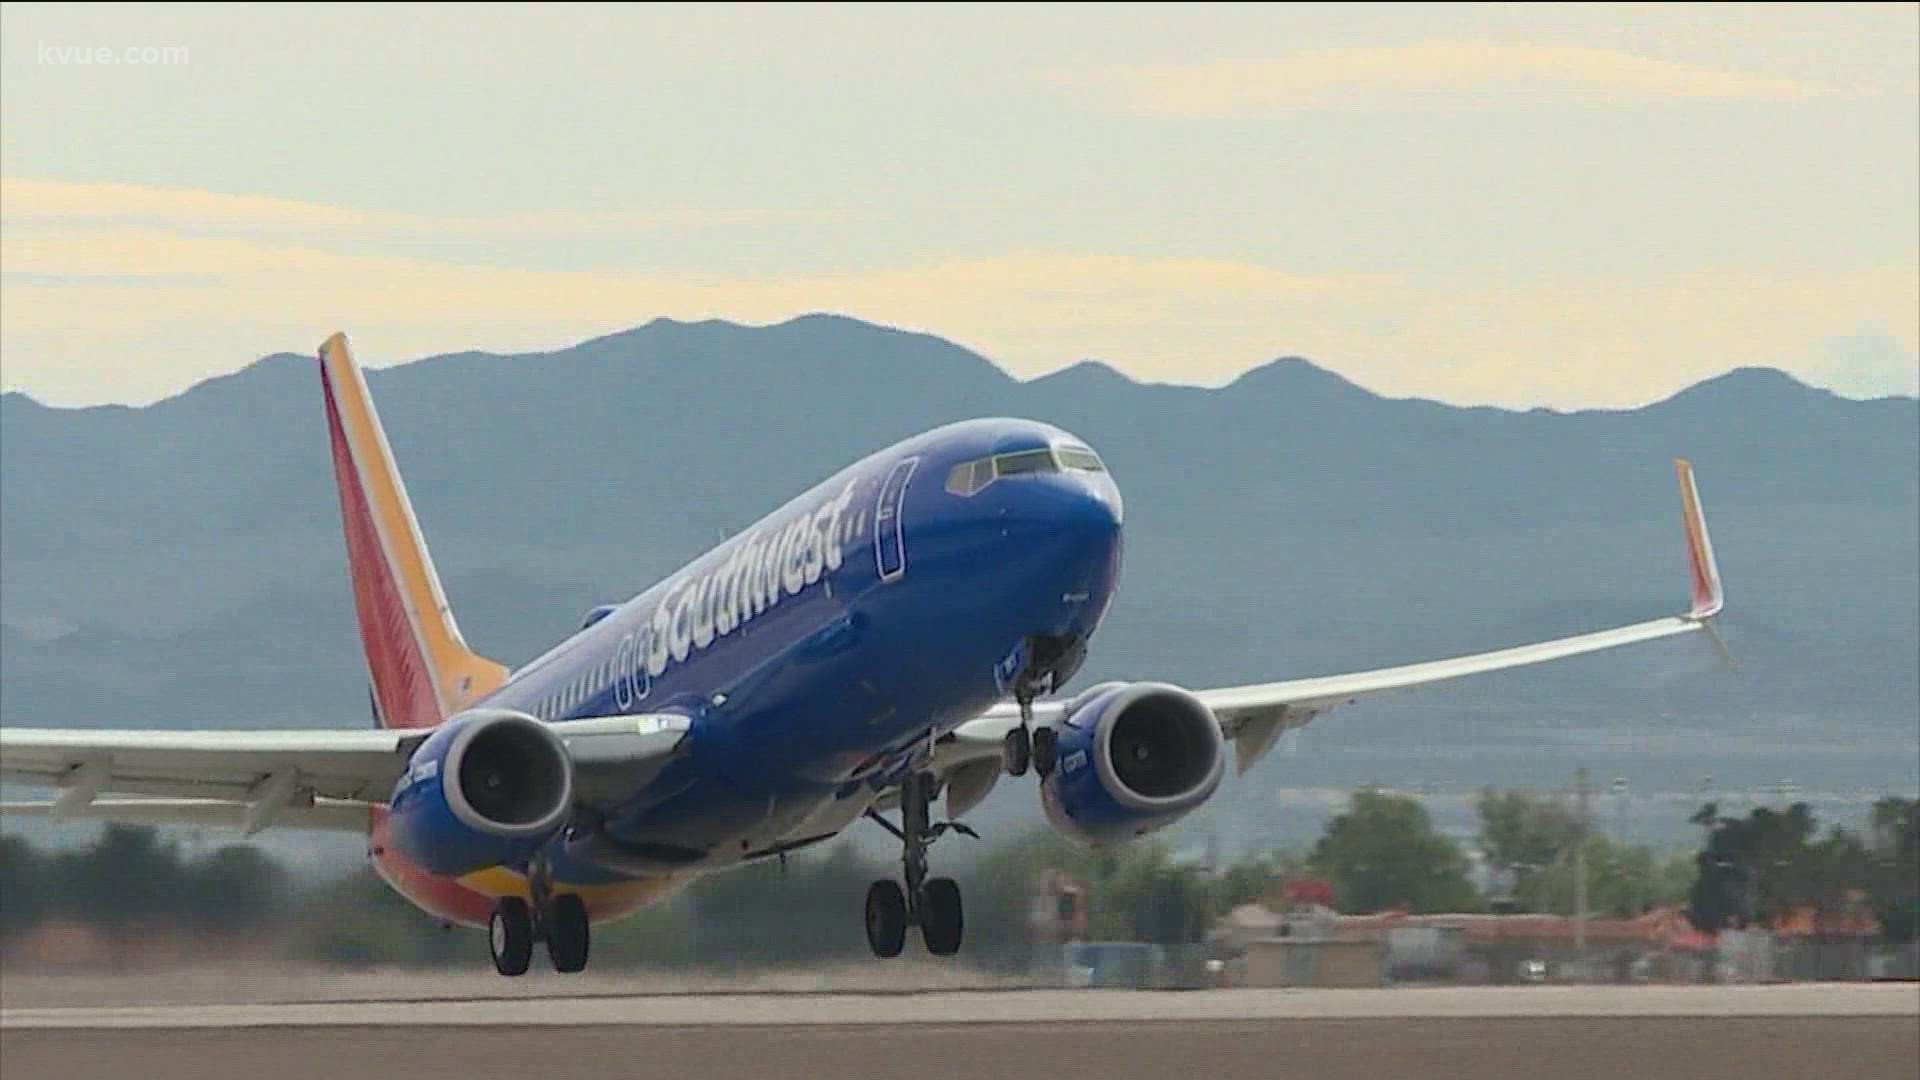 Southwest Airlines will now have 105 departures a day and offer nonstop service to nearly 50 locations from the Austin airport.